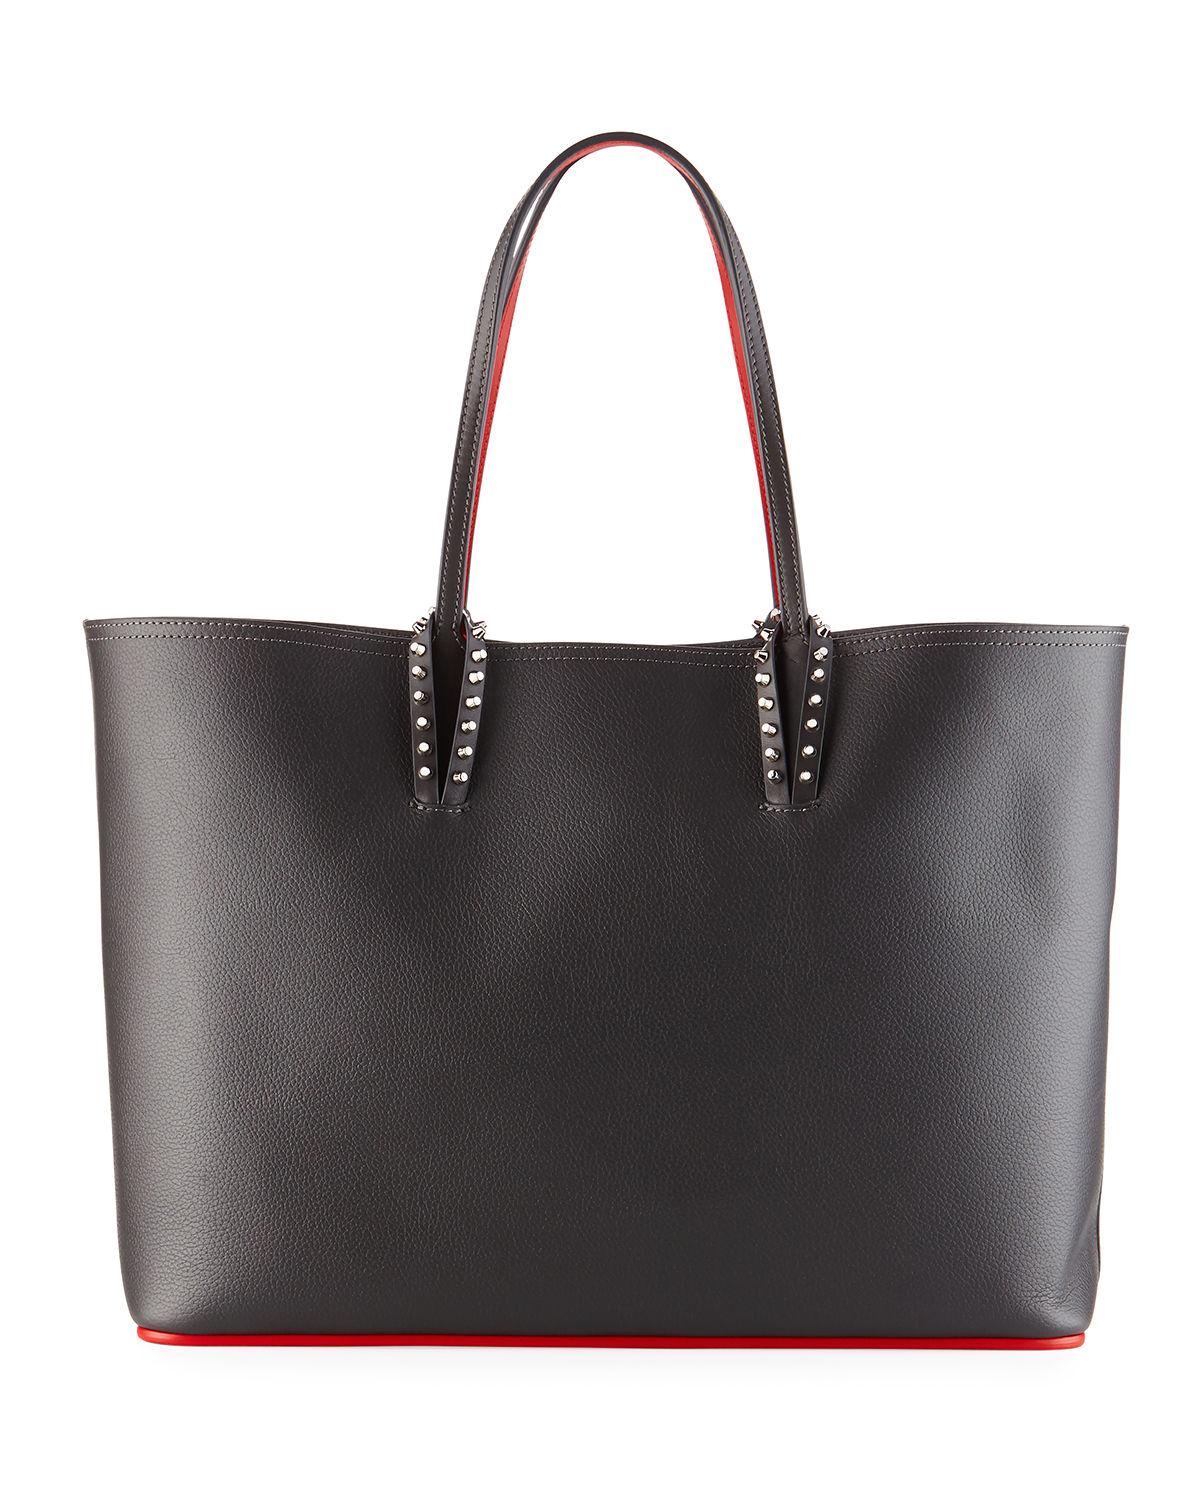 Christian Louboutin Cabata East-west Leather Tote Bag in Black - Lyst